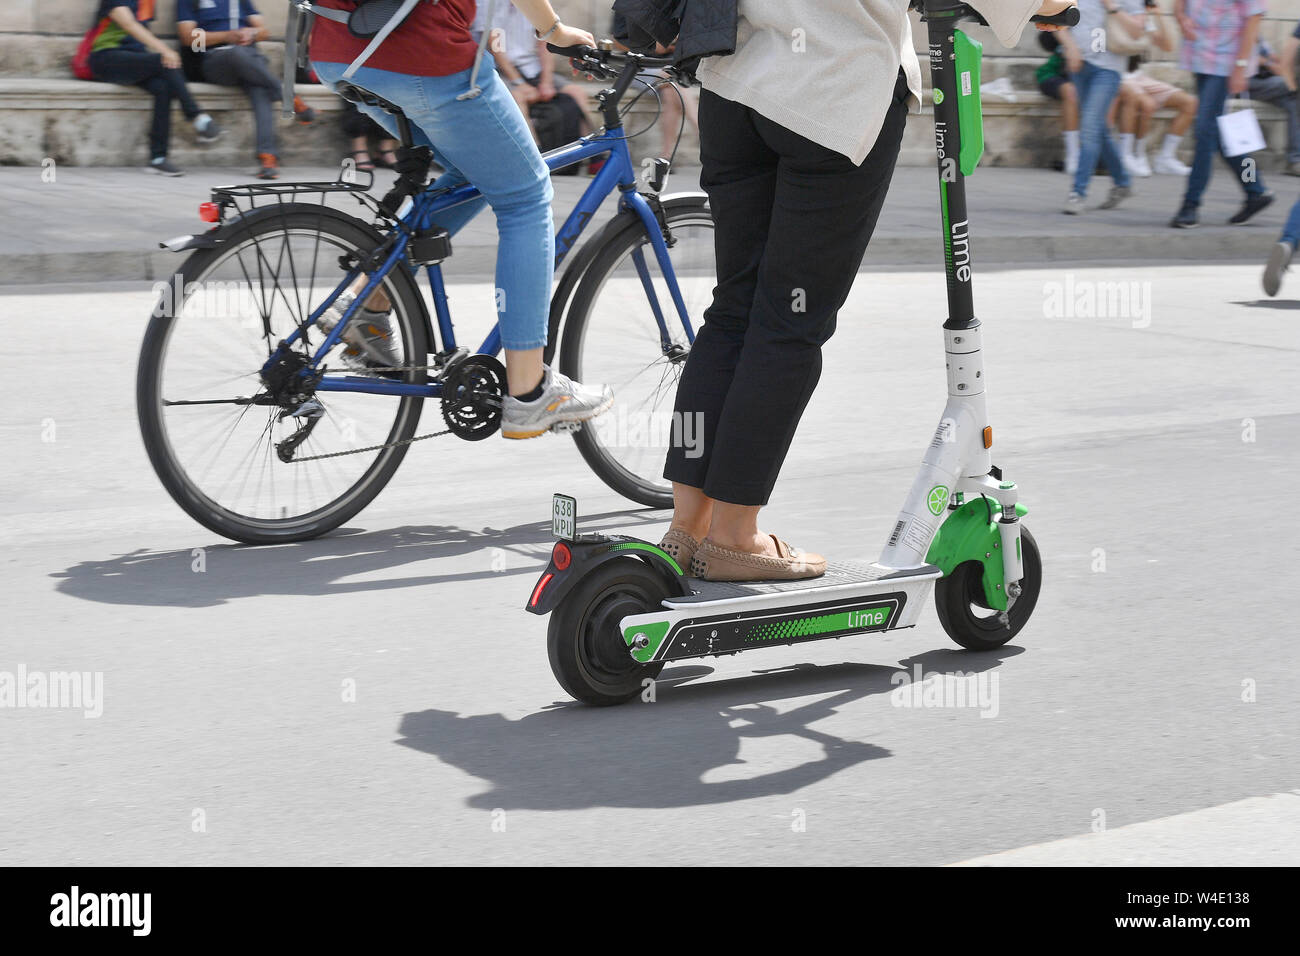 Munich, Deutschland. 22nd July, 2019. E-scooter competes on the road with a  bicycle, cyclist, rider. LimeBike, Lime Bike US e-scooter rental company.  E-scooter, e-scooter in the city center of Munich. Leihroller, Mietroller,